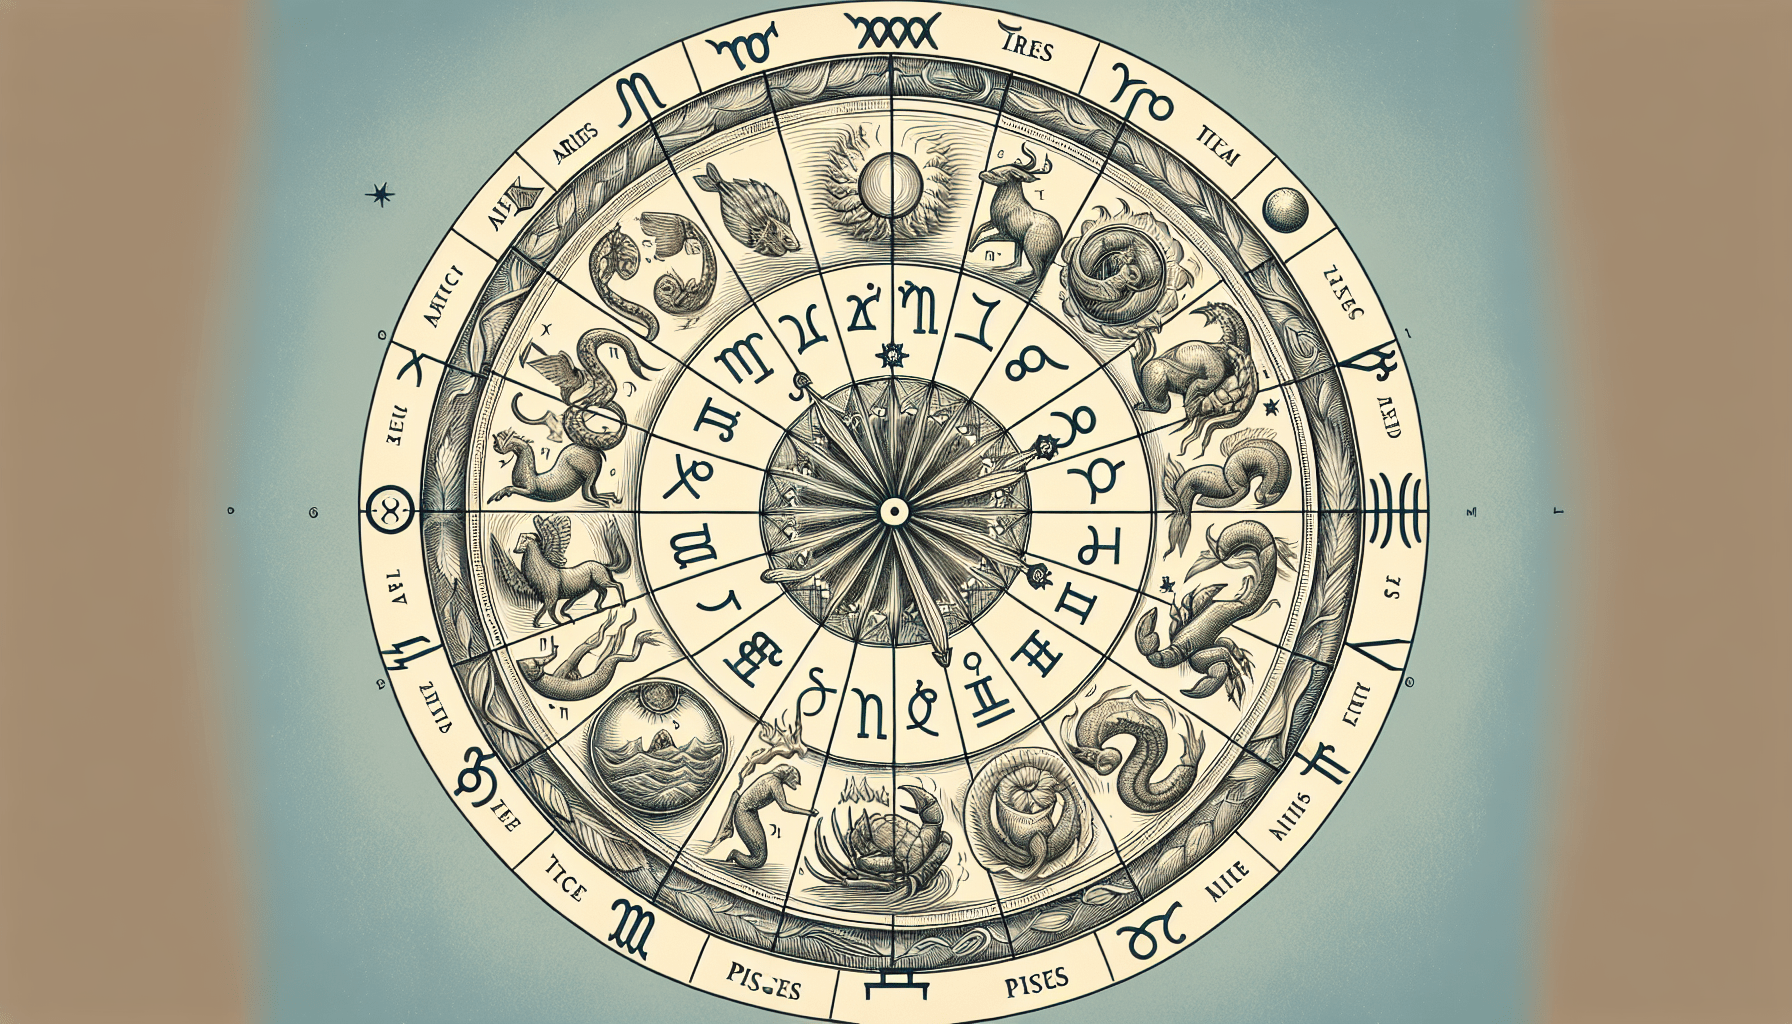 What Determines The Order Of The Zodiac Signs?